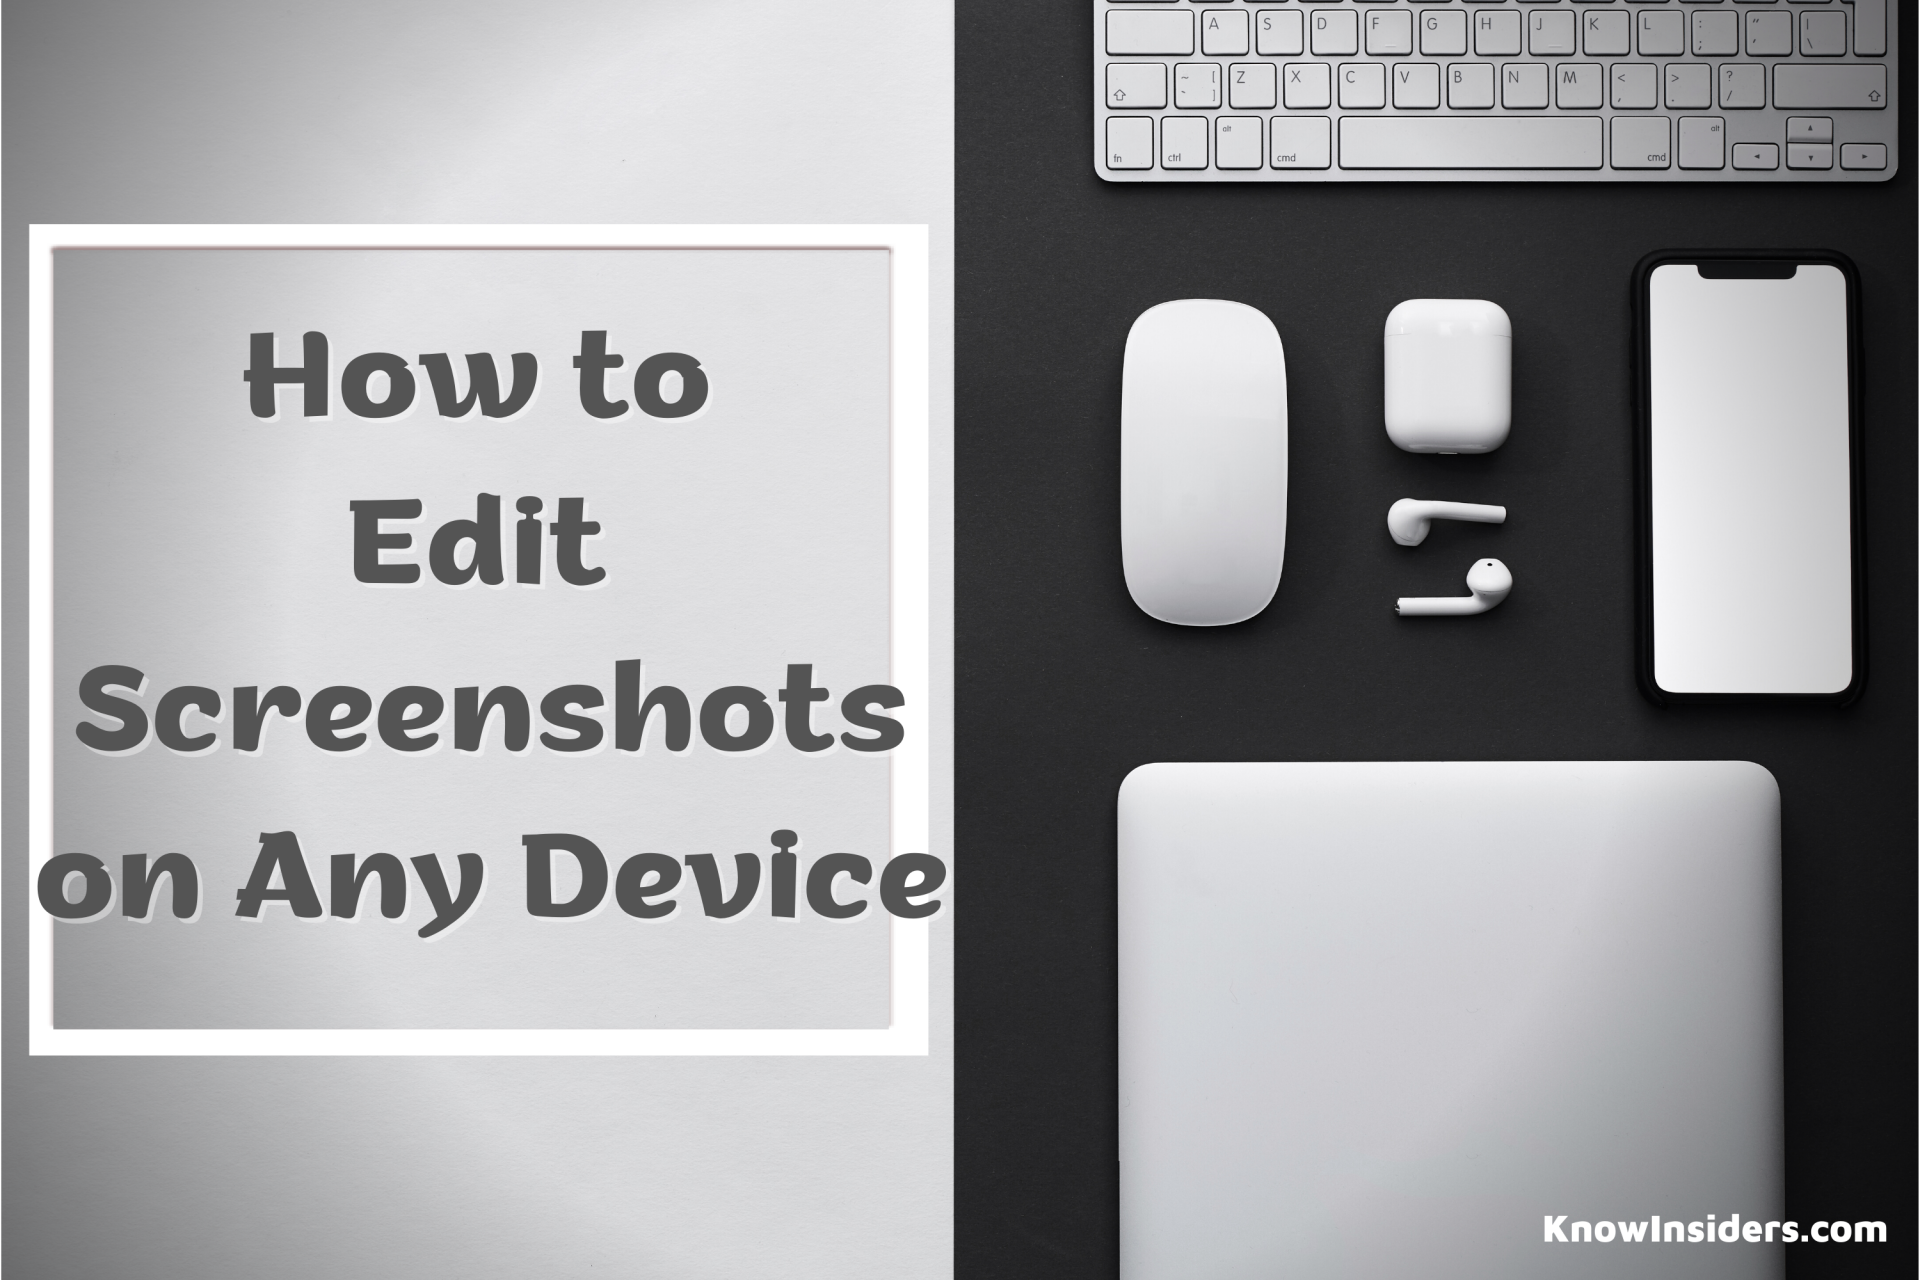 How to Edit Screenshots on Any Device